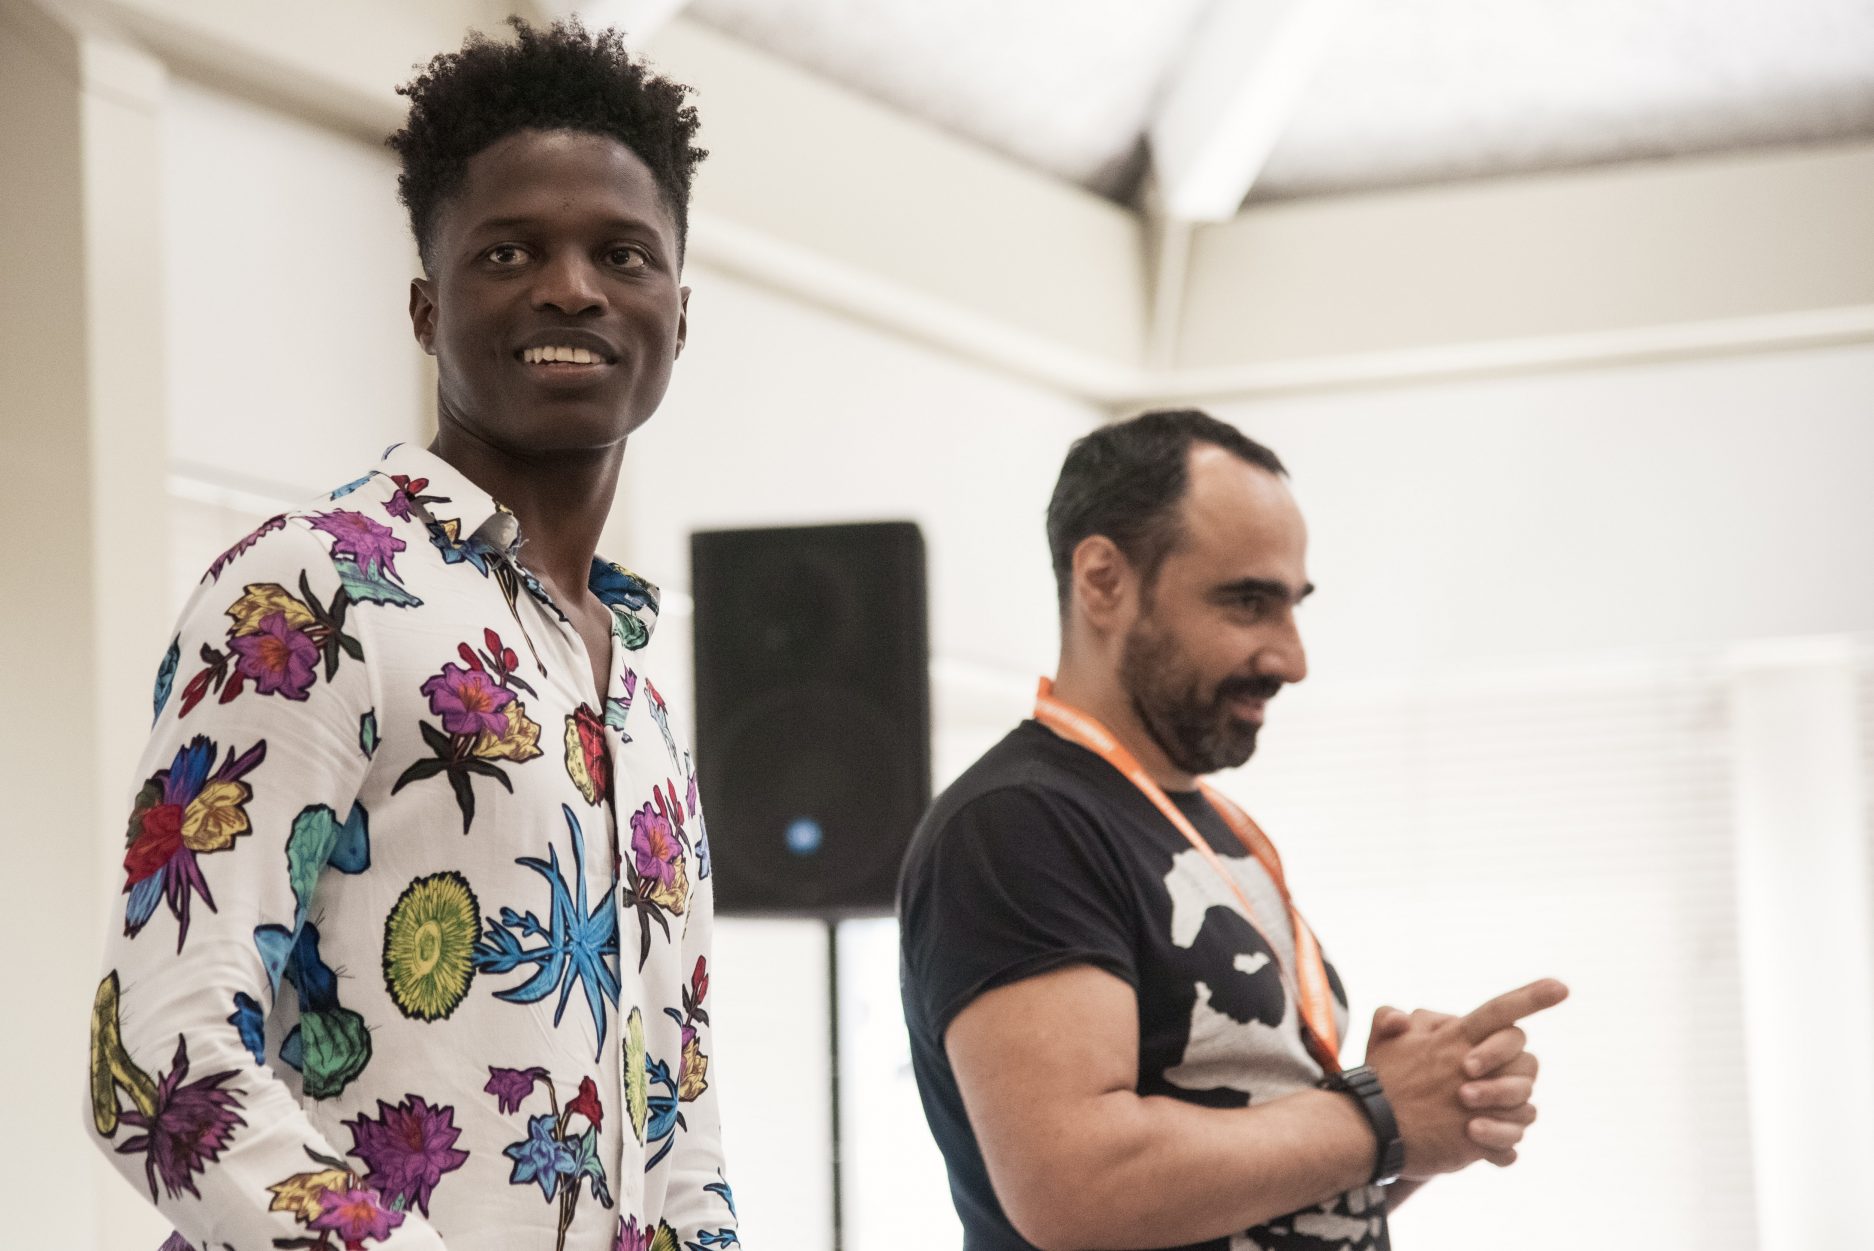 Taku Mutero (Claudio) and Guy Rhys (Benedick) in rehearsals for Much Ado About Nothing. Photo by Chris Saunders. (2)